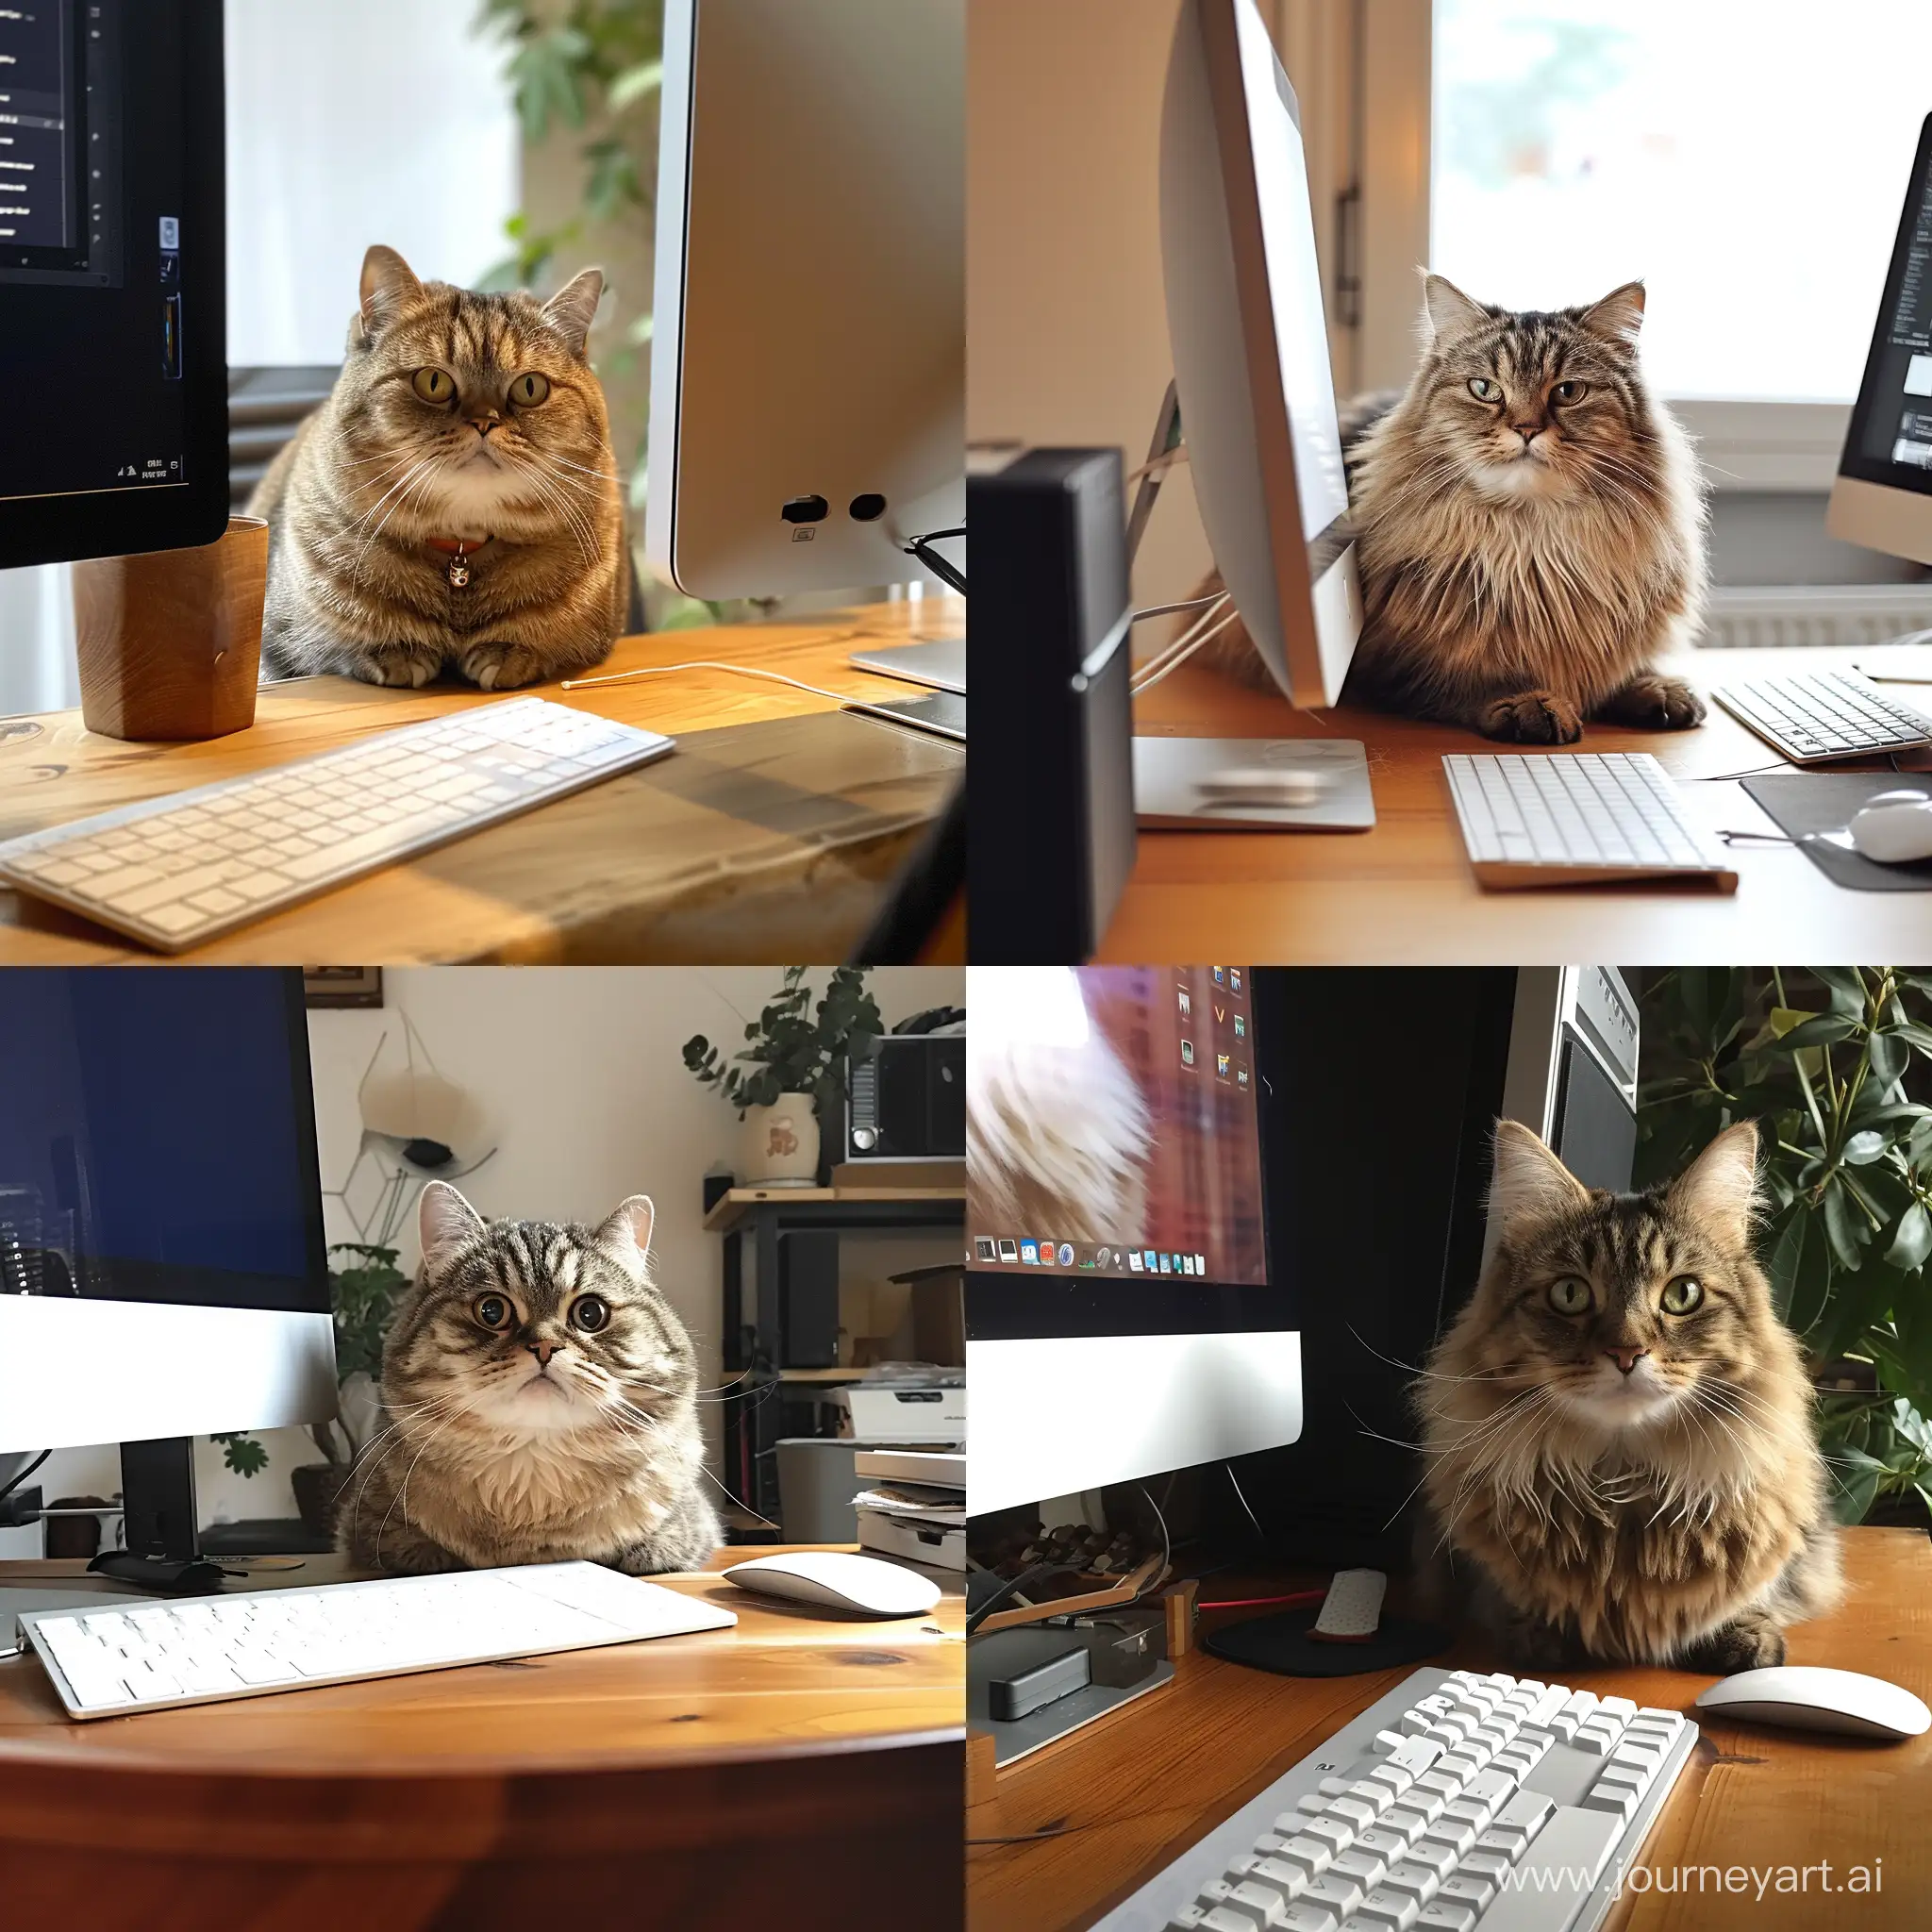 A fat cat sitting behind the computer desk